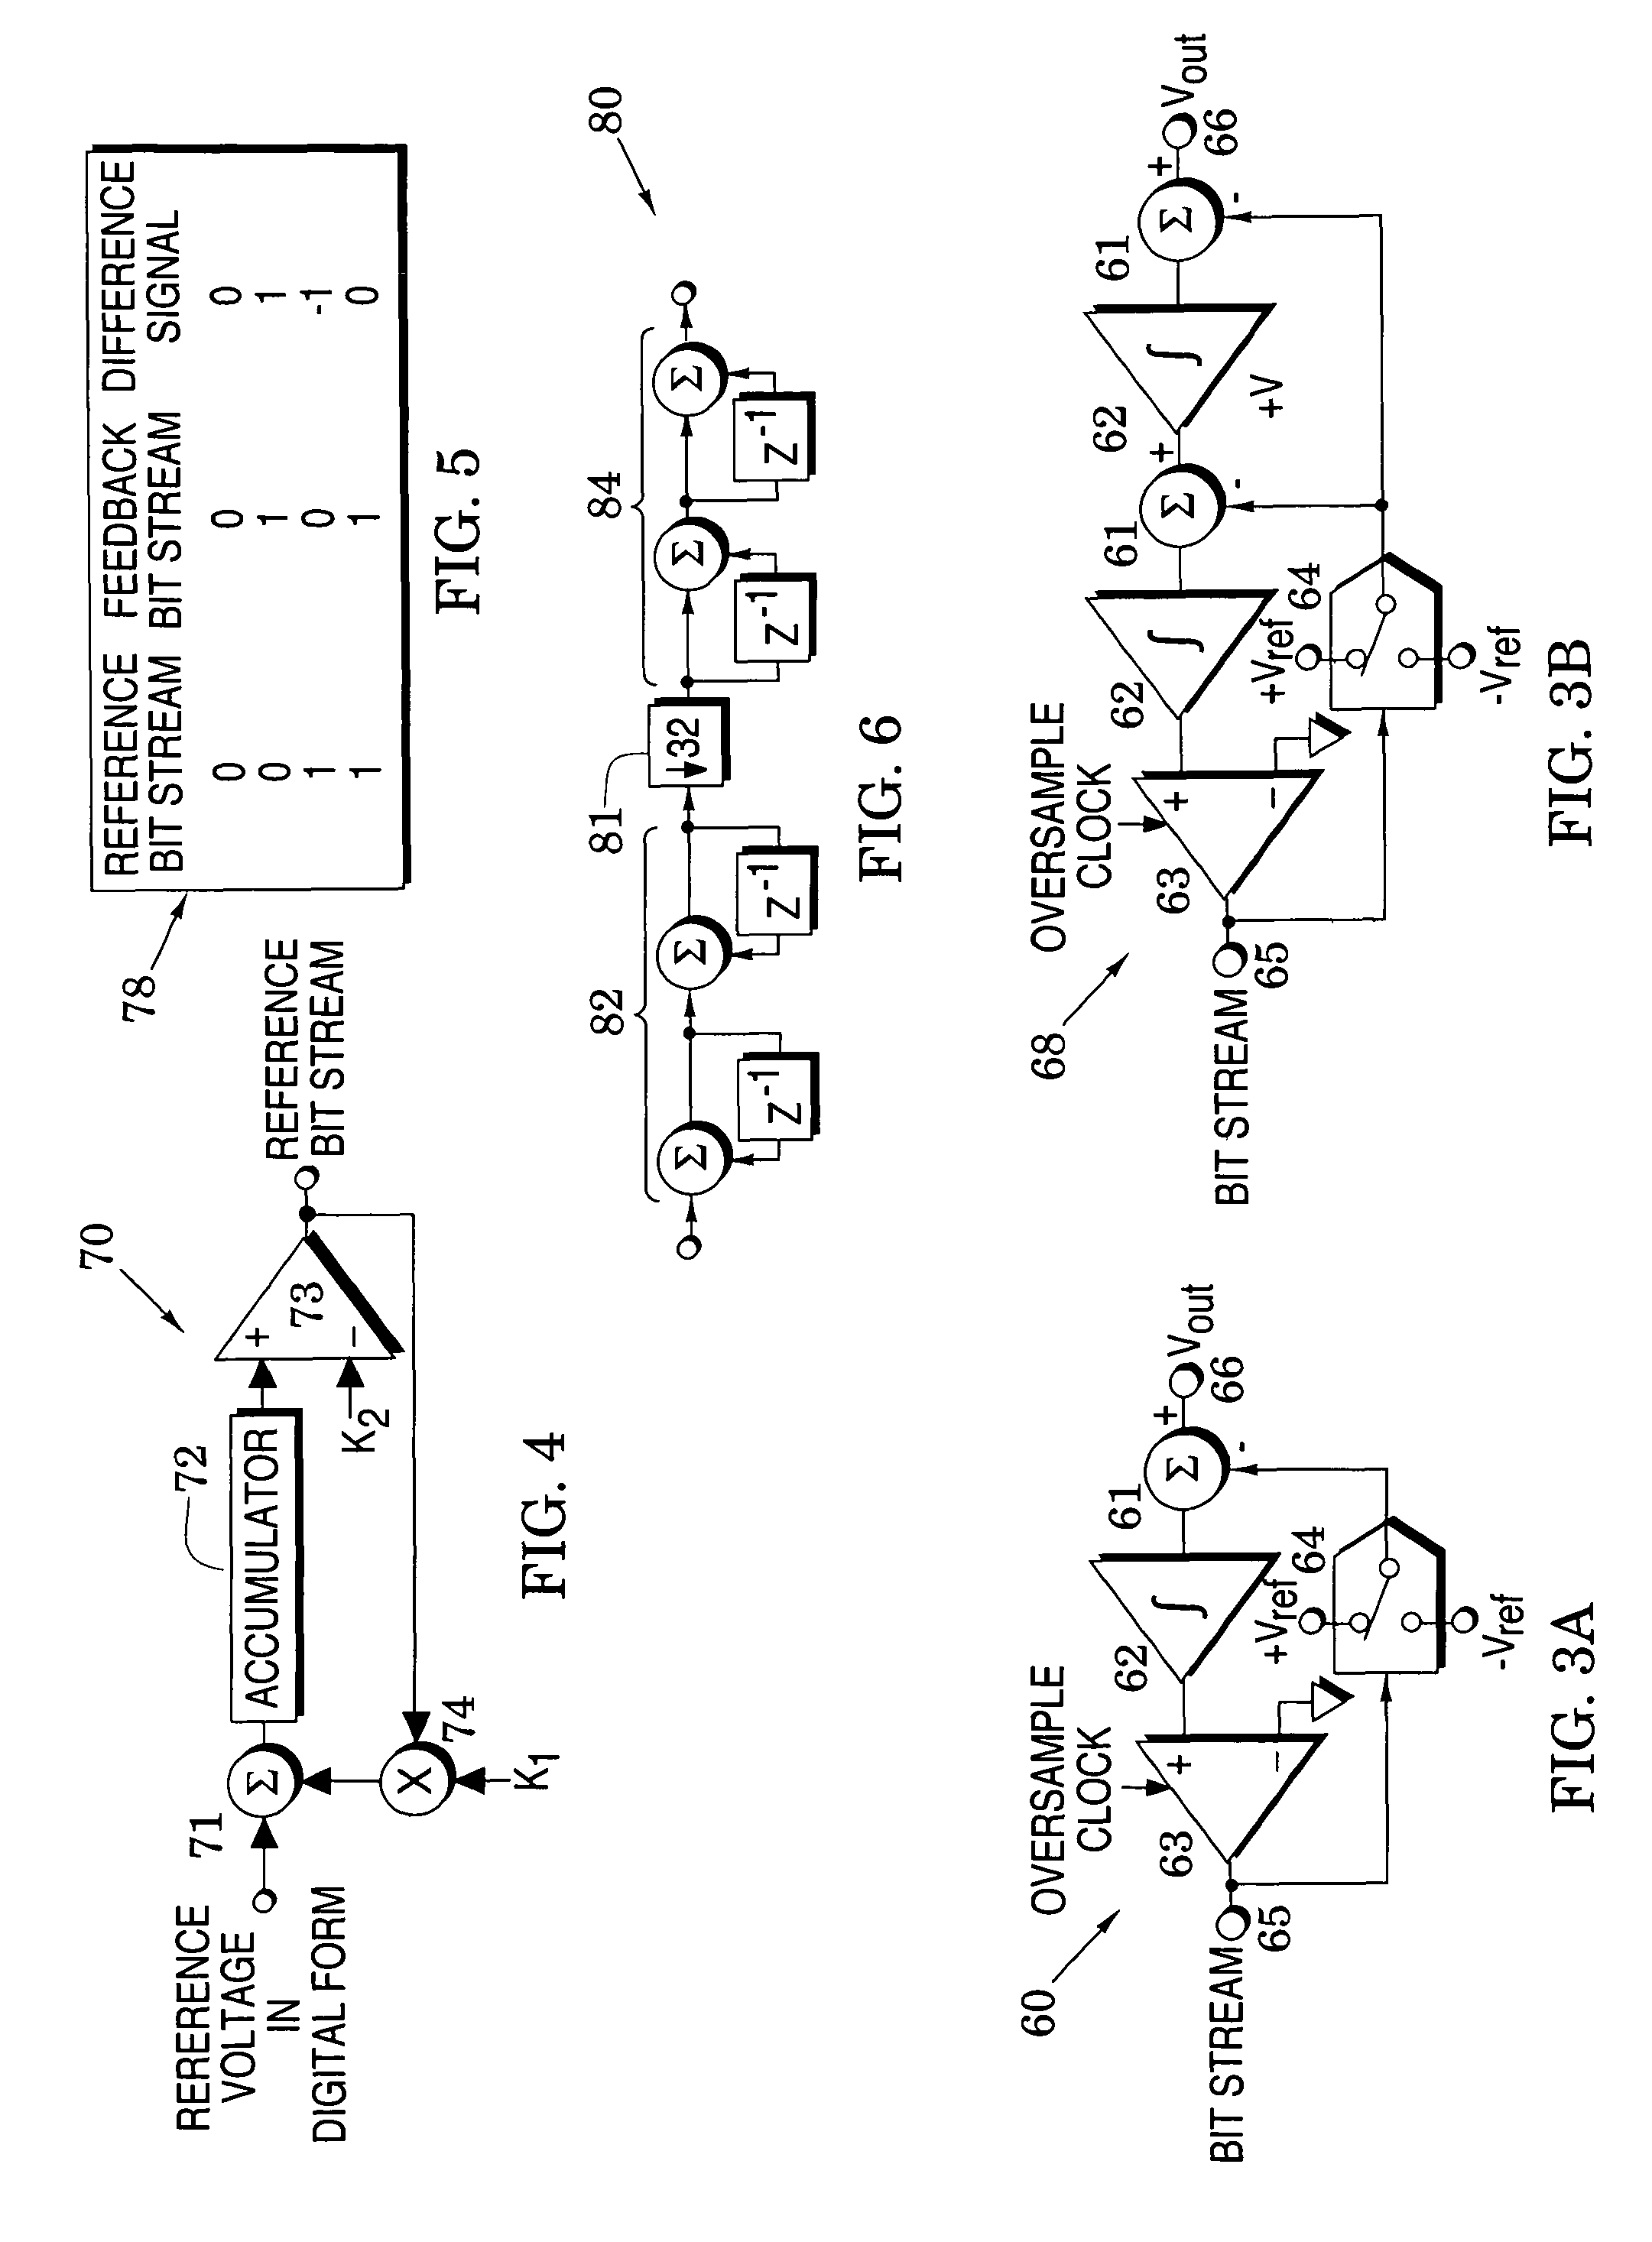 Switching converters controlled via sigma delta modulation